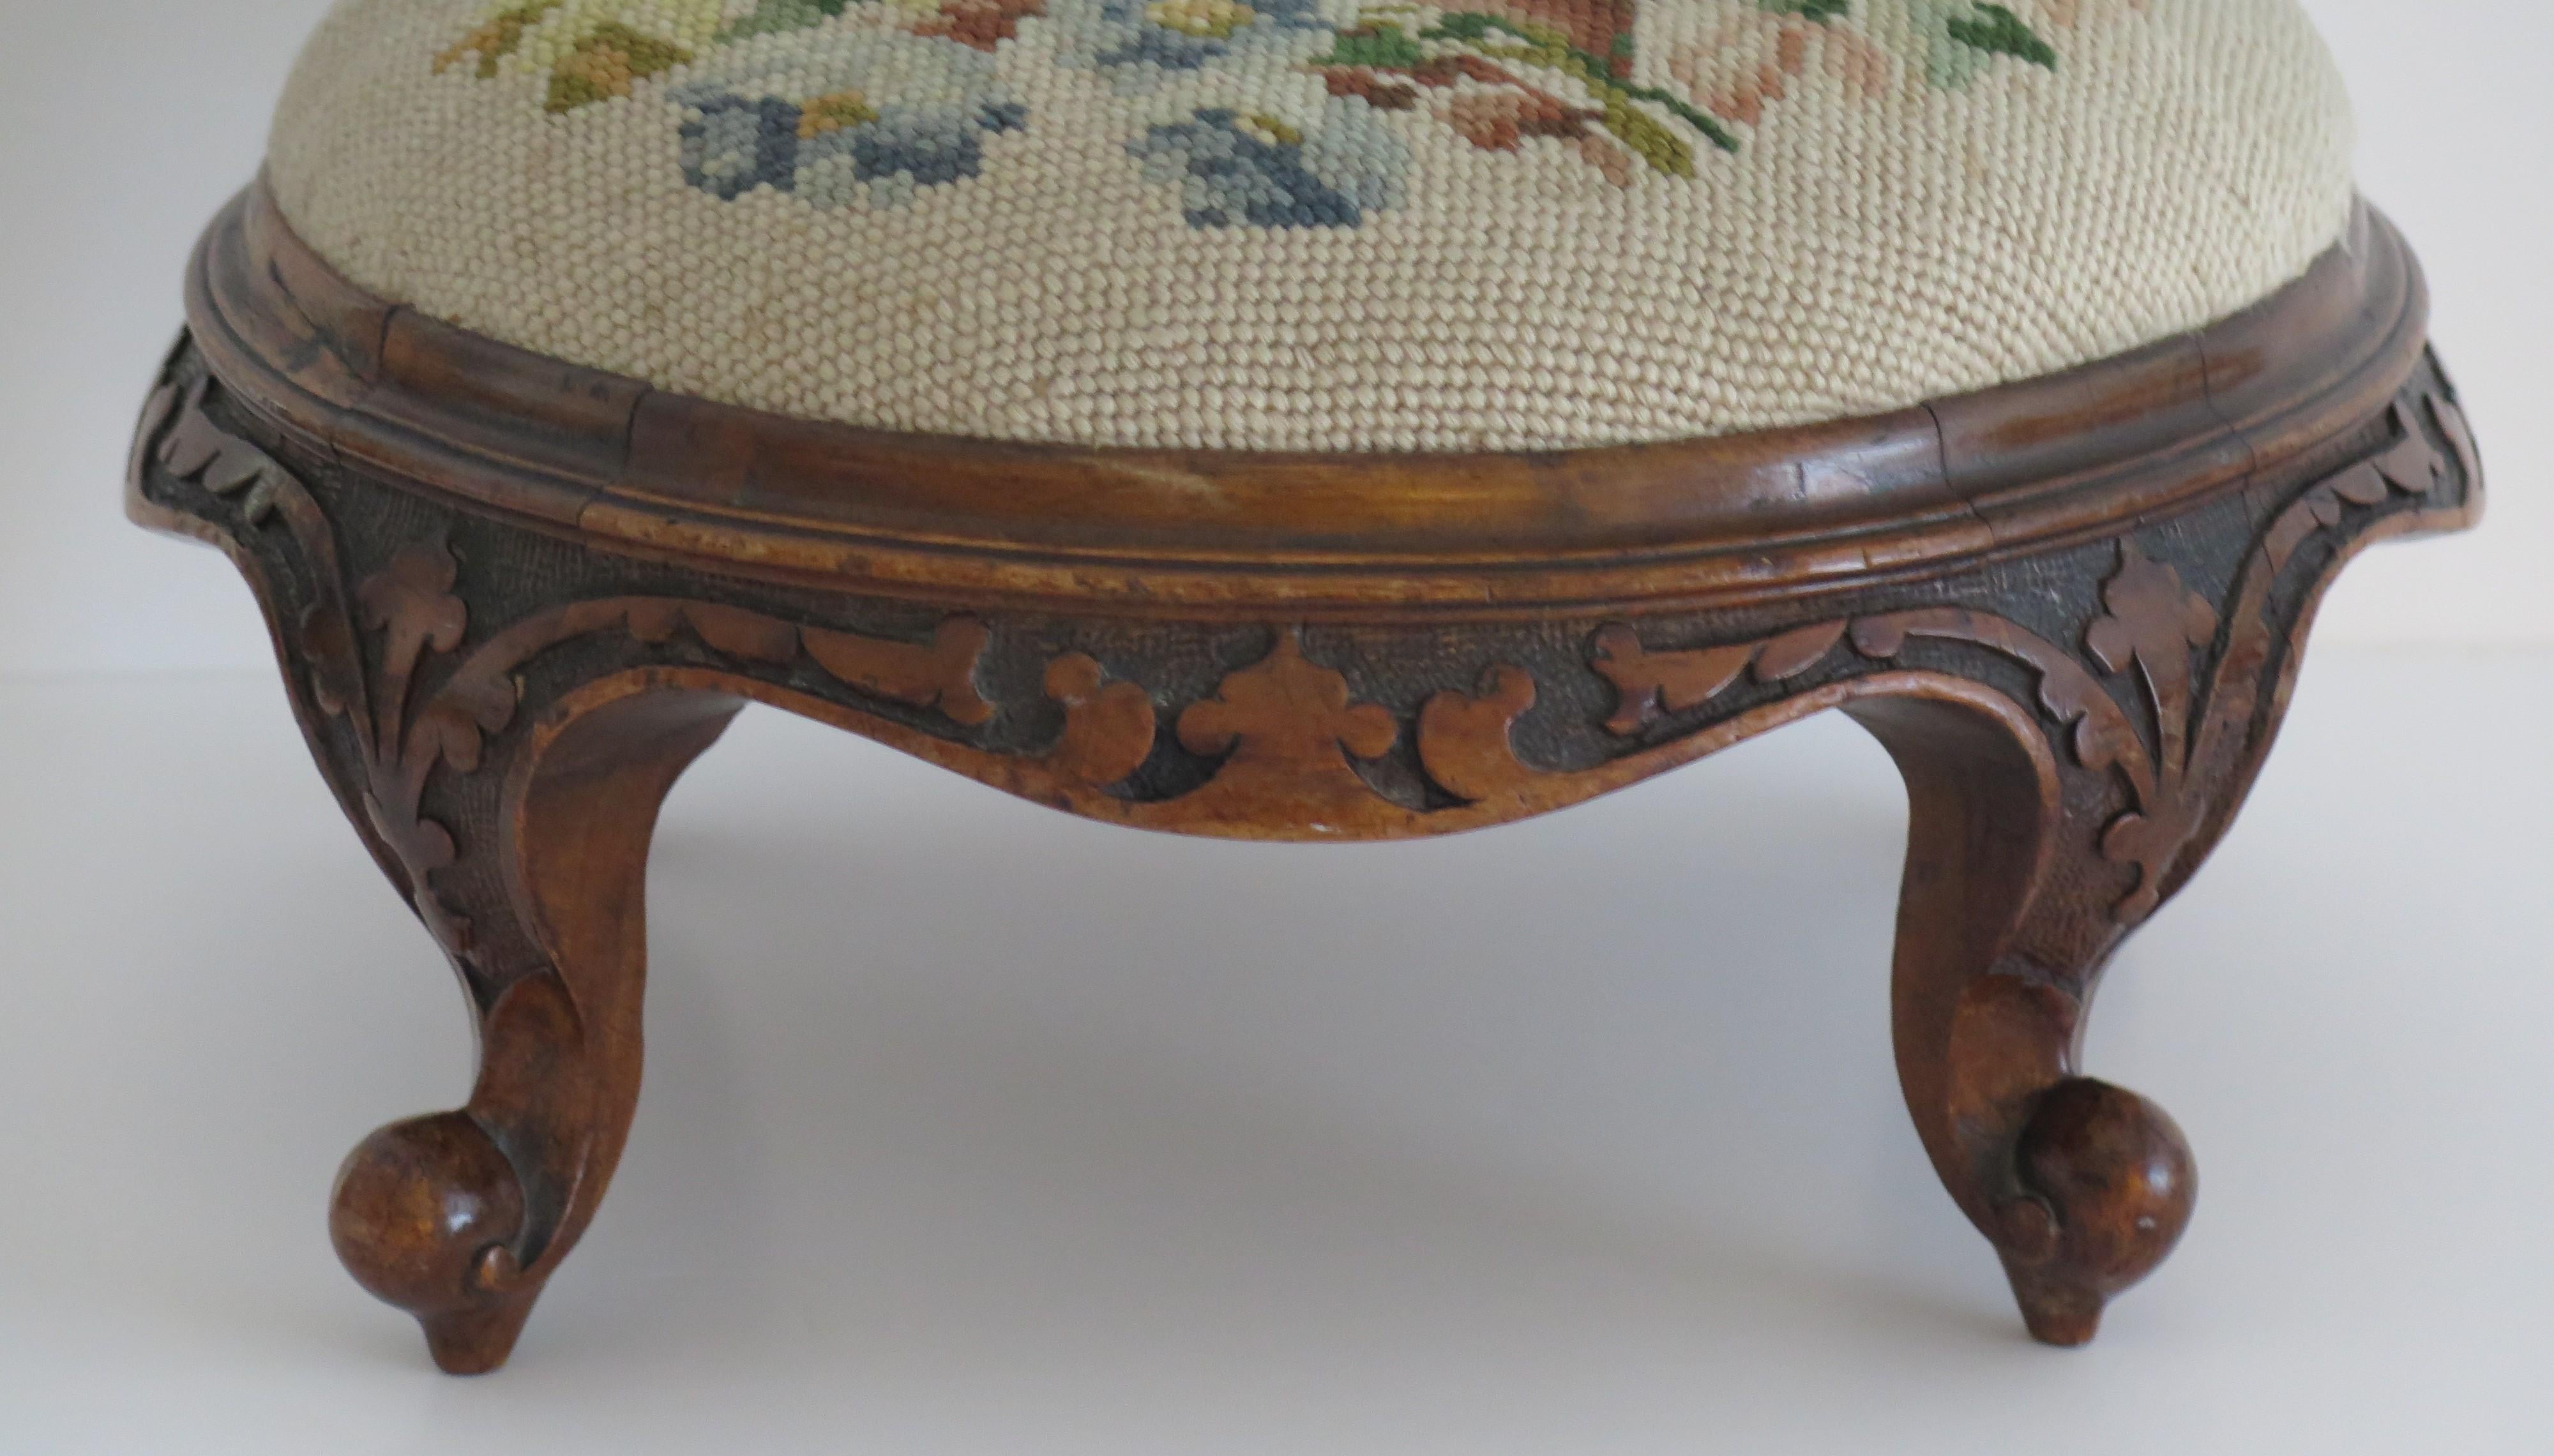 Foot Stool Early Victorian Carved Walnut with Wool-Work Top, English, Circa 1850 In Good Condition For Sale In Lincoln, Lincolnshire